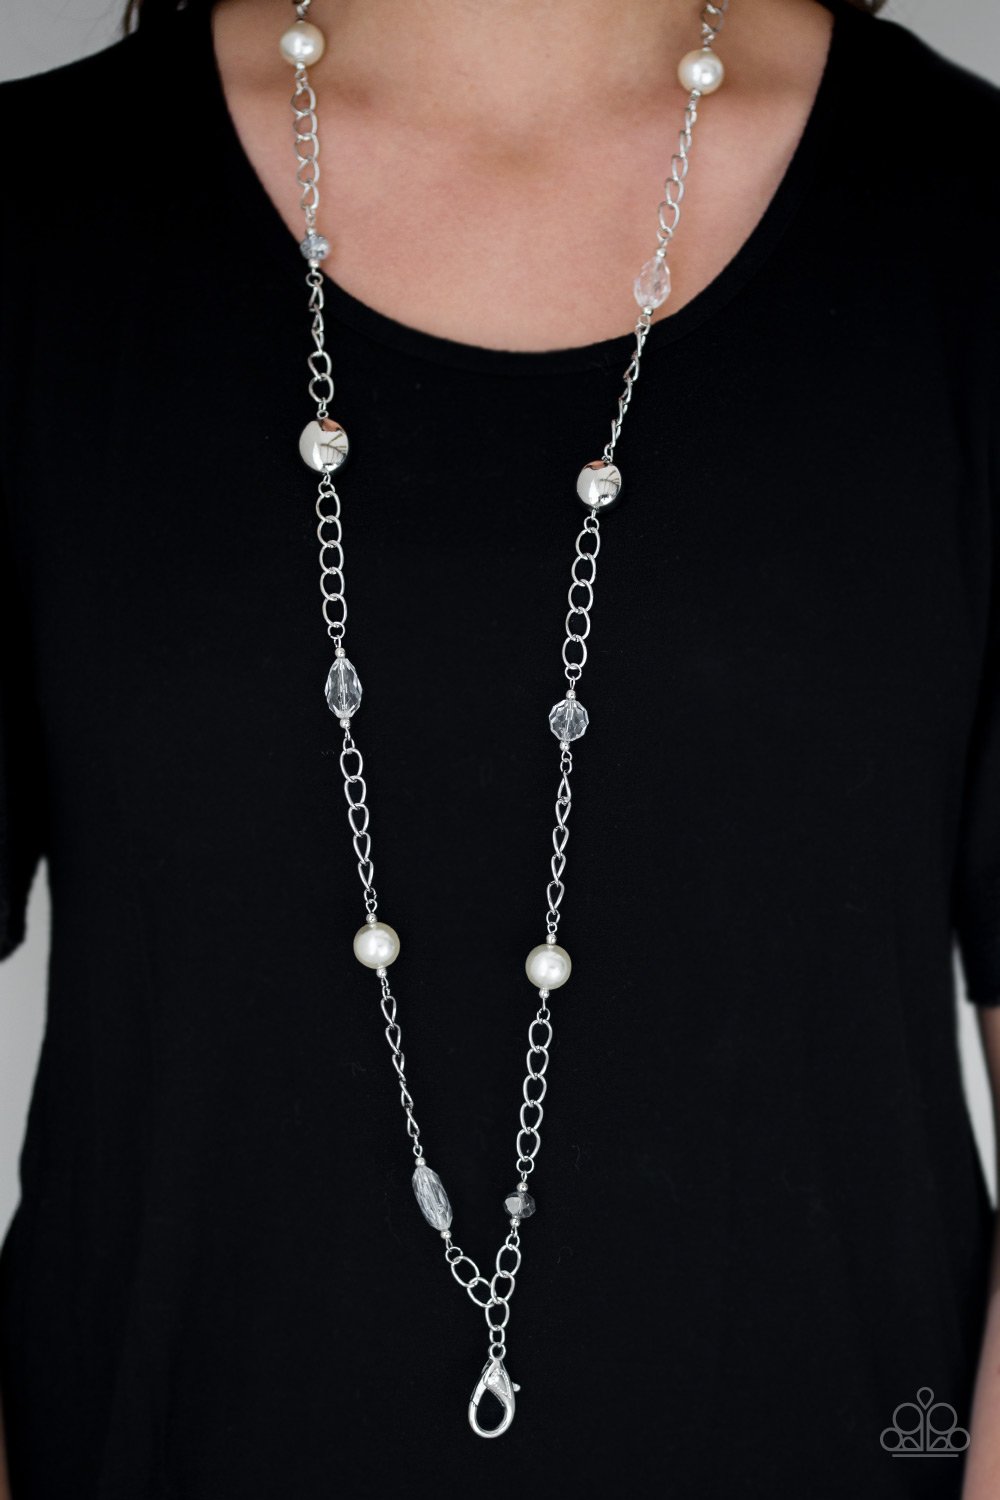 Only For Special Occasions - White Lanyard Necklace